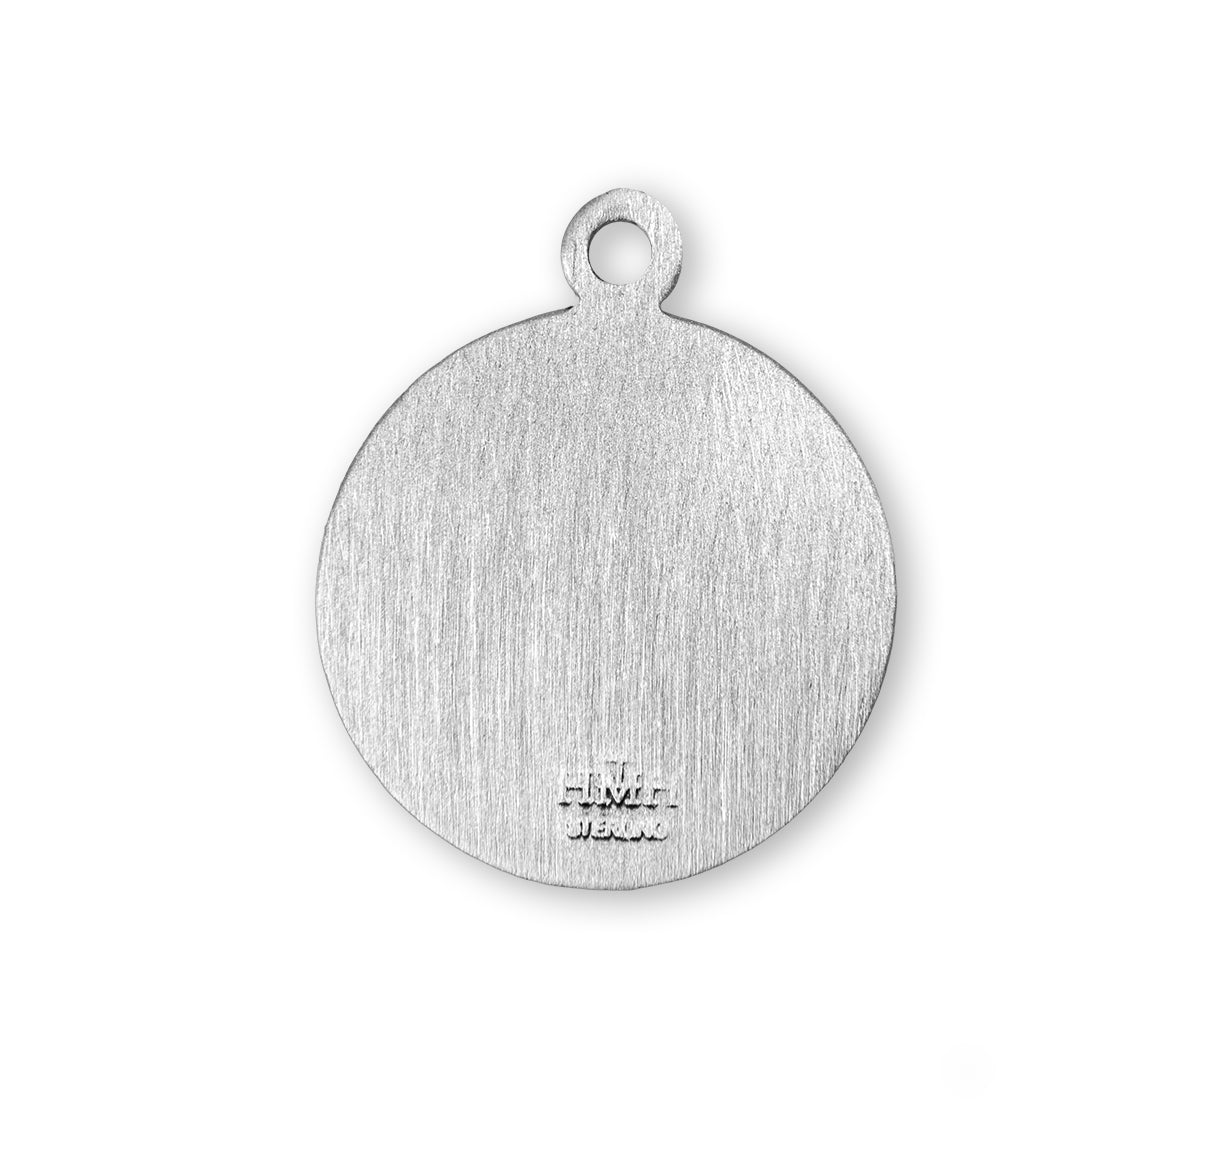 St. Maria Goretti Sterling Silver Medal Necklace